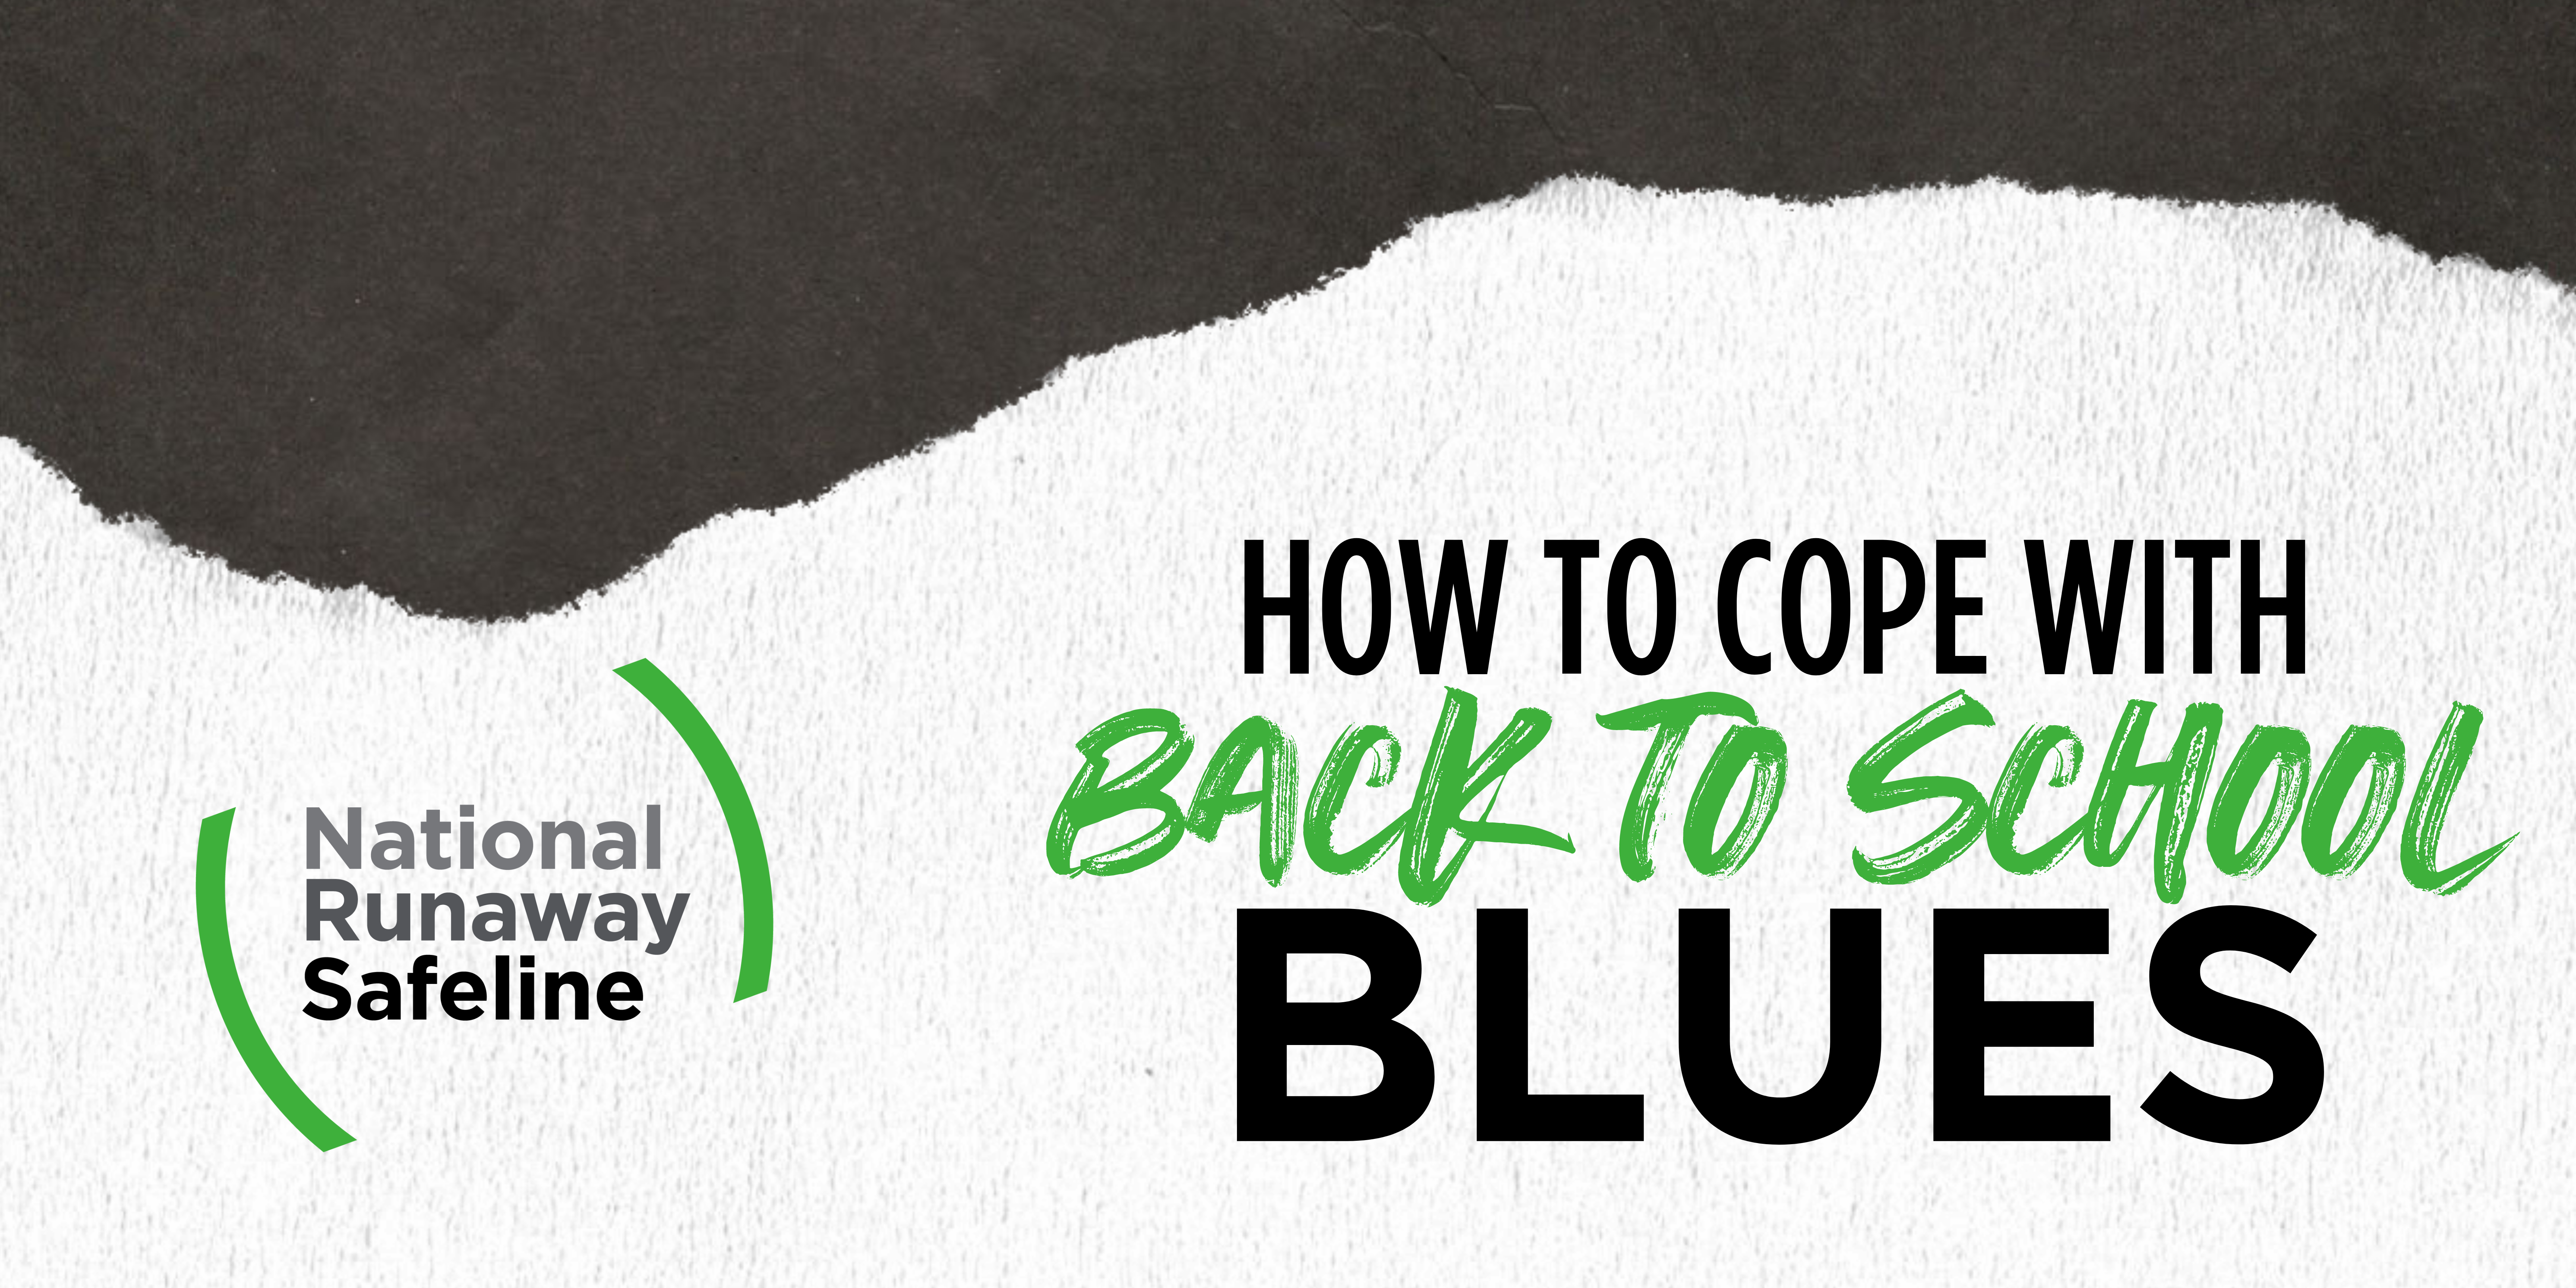 Back to School Blues – How to Cope